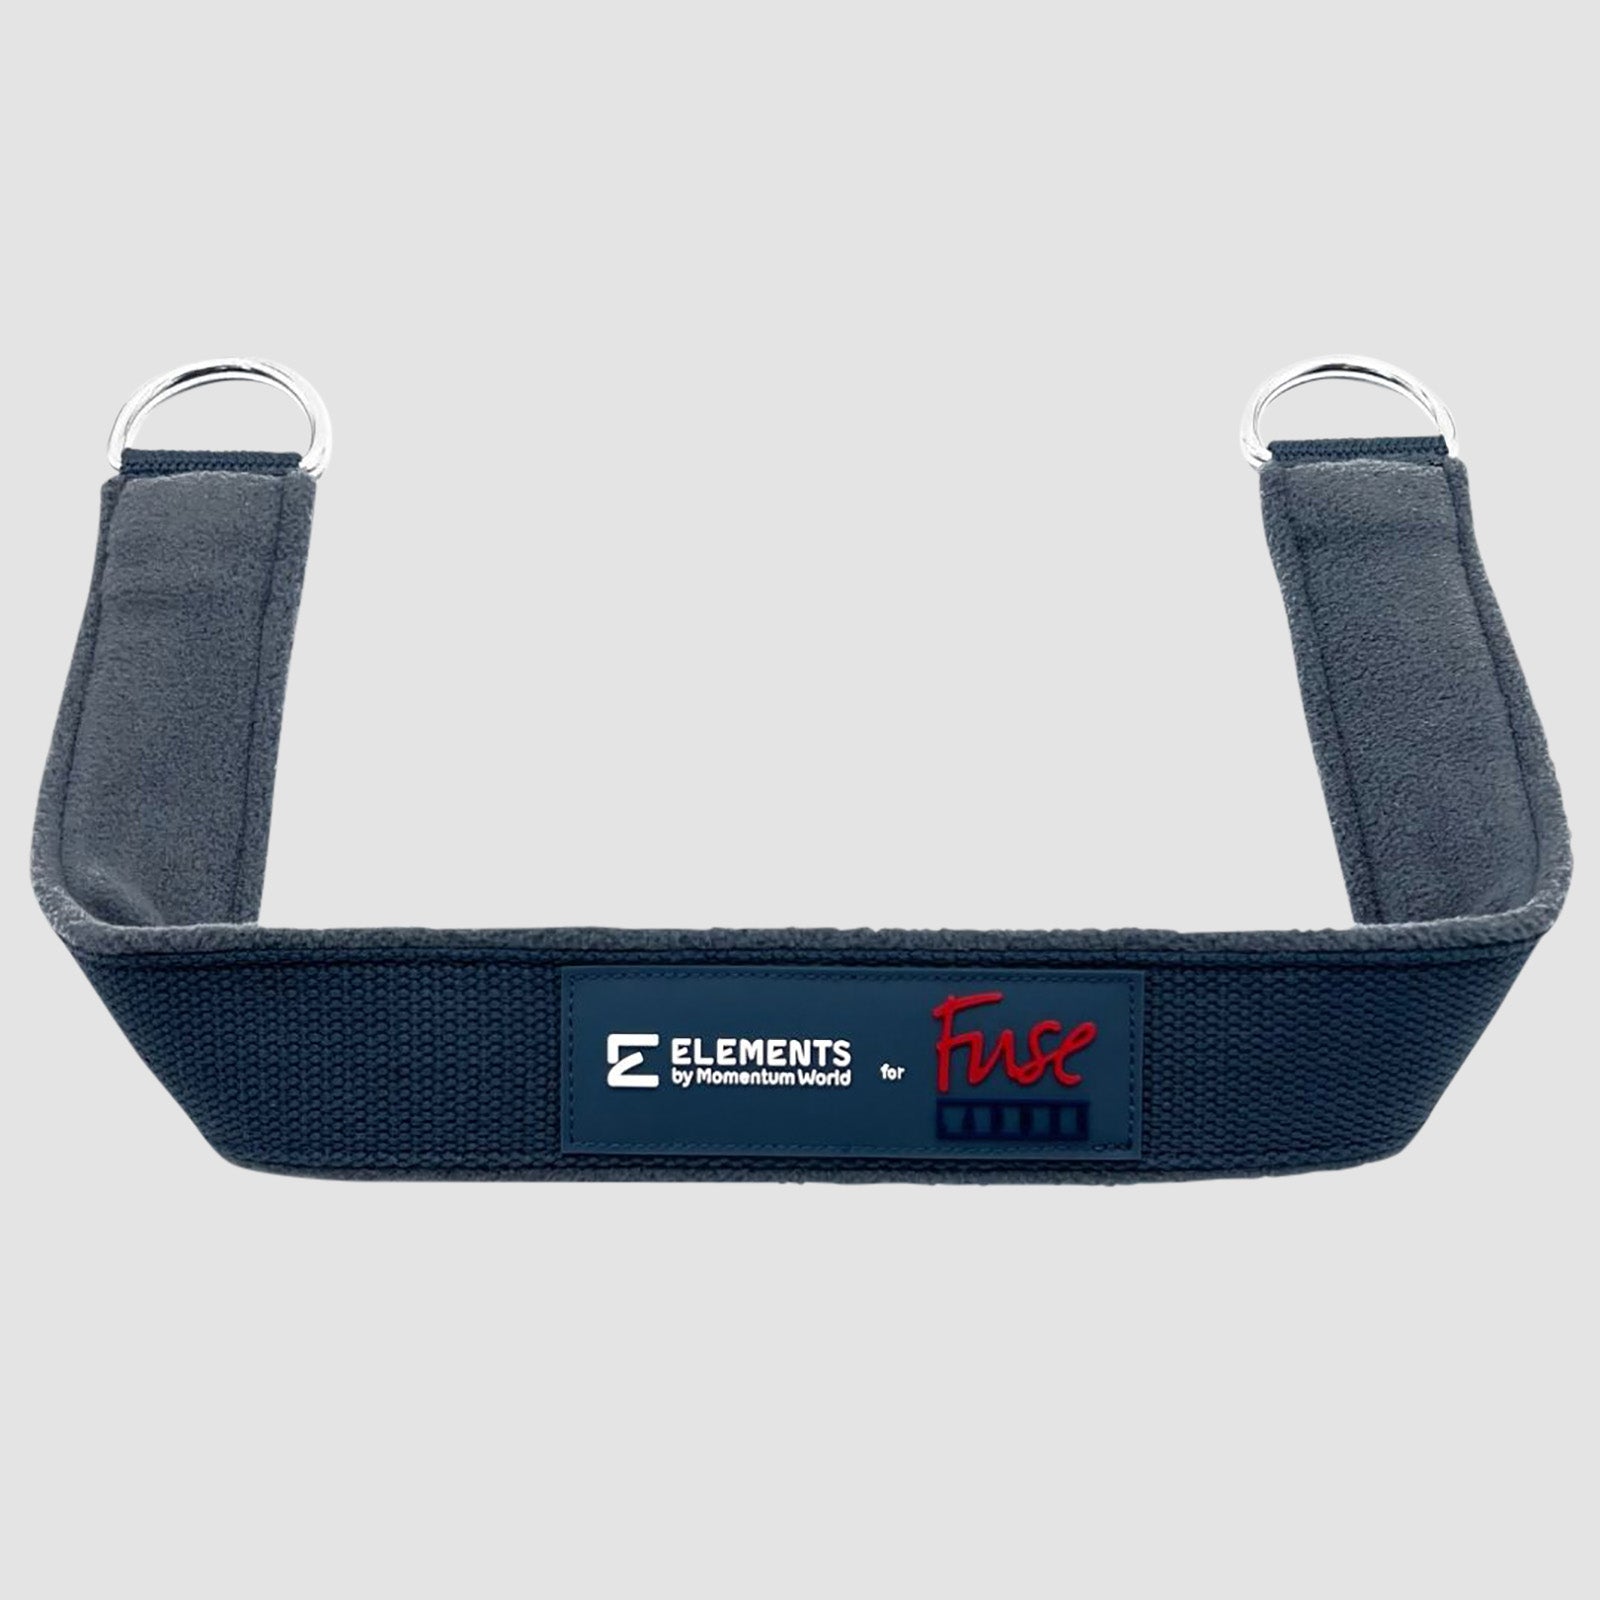 The Fuse Ladder connector strap with d-rings links pilates tower springs together to increase weight training resistance.